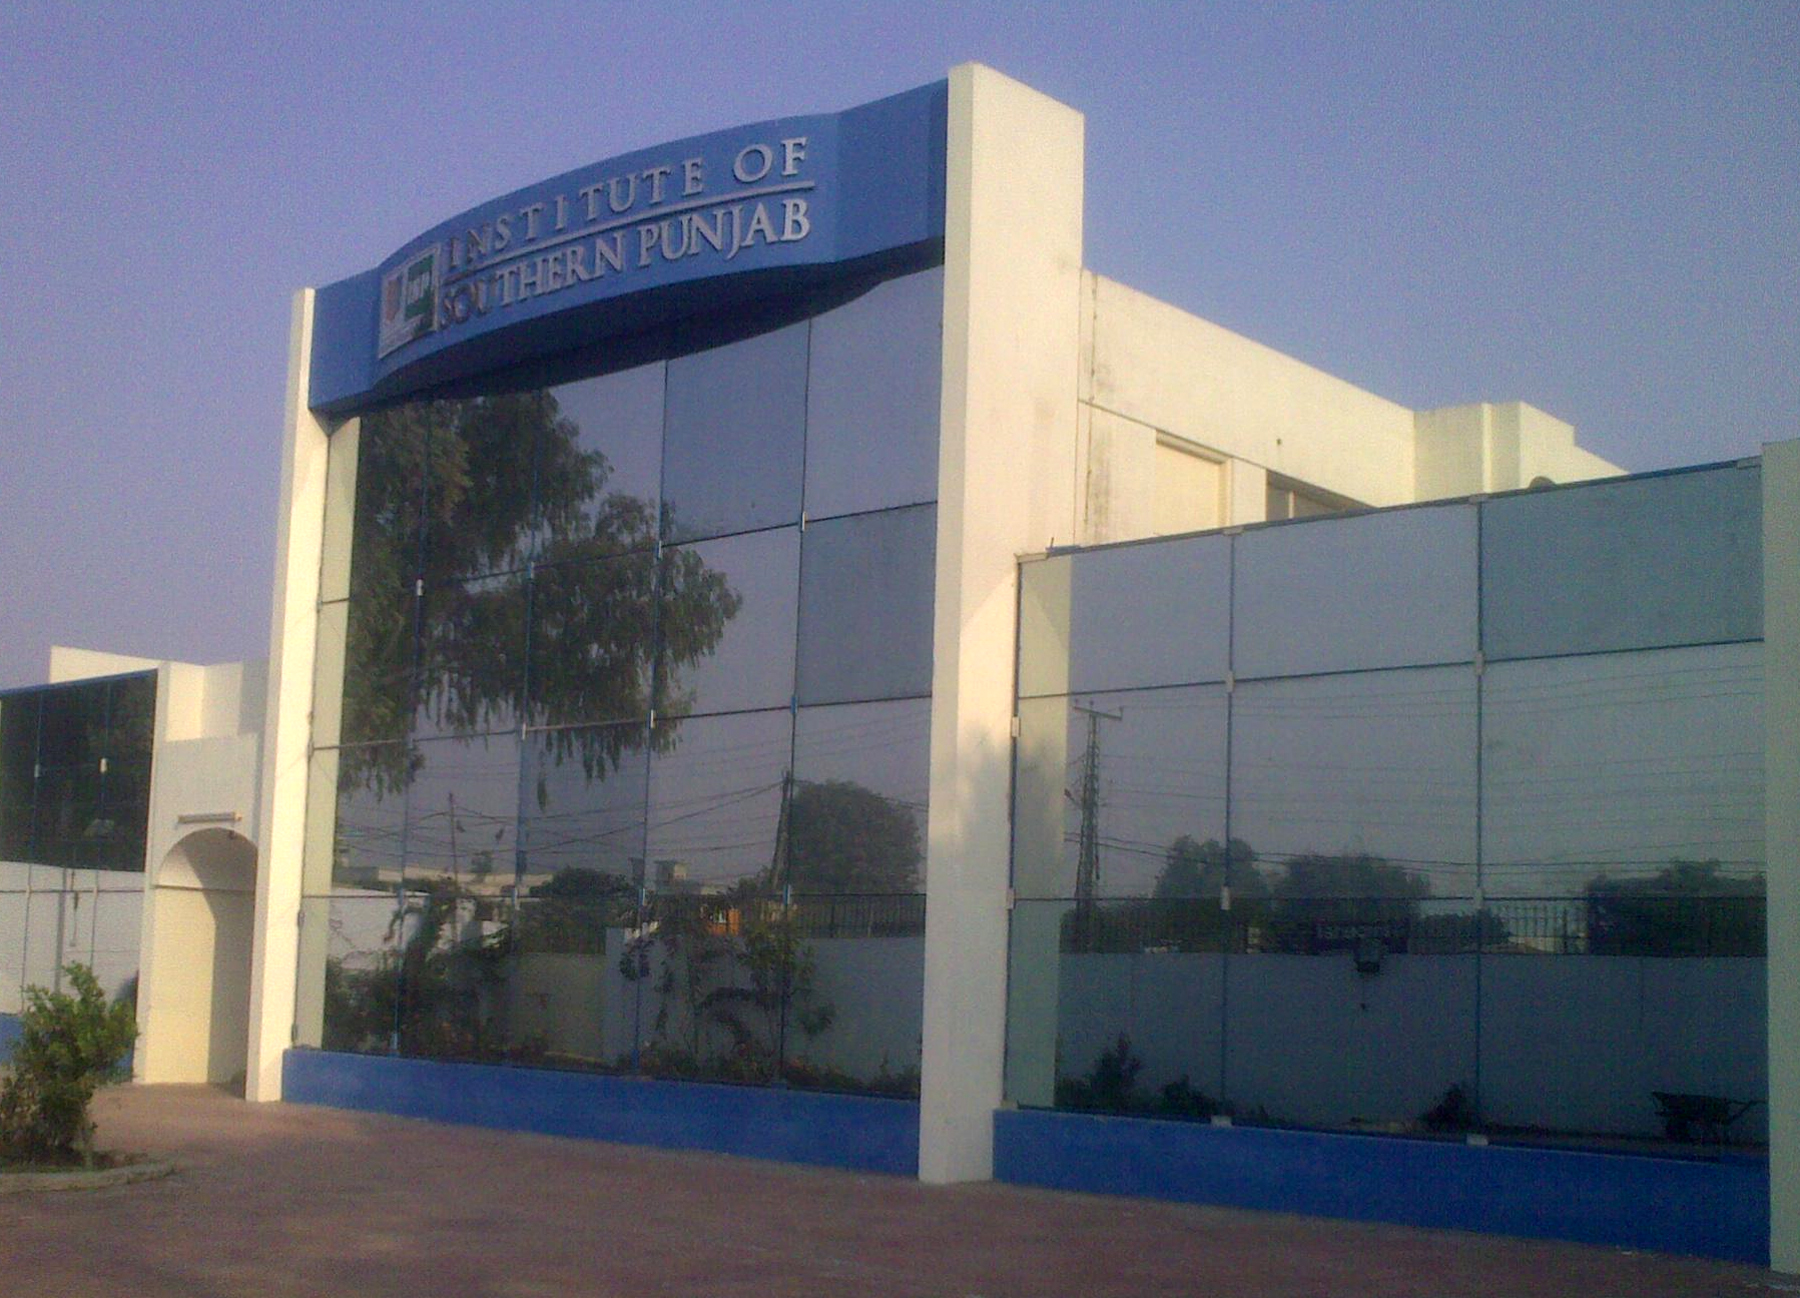 Institute of Southern Punjab Admission